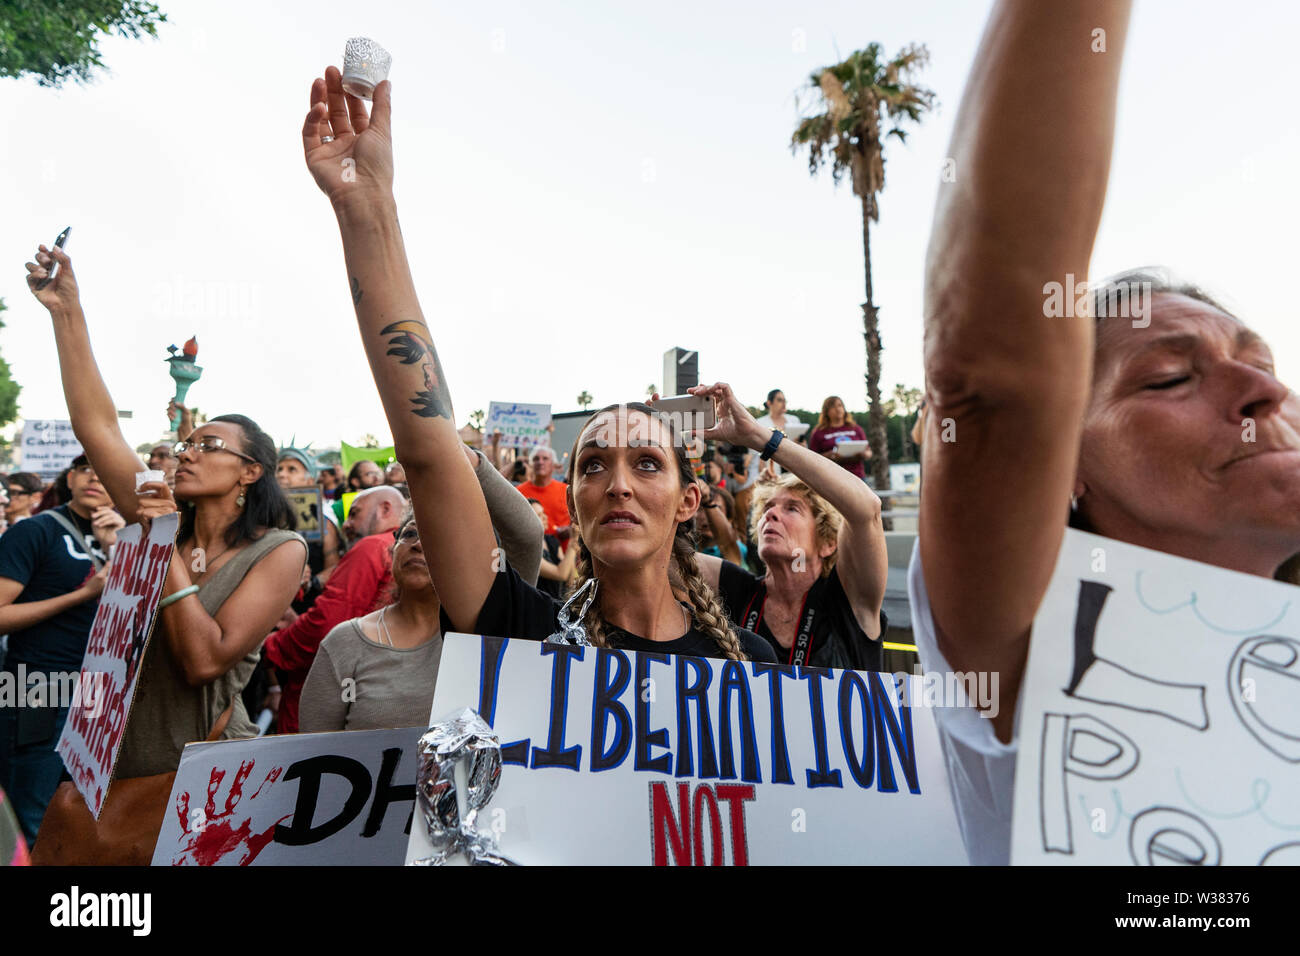 People protest against ICE raids and migrant detention camps during a vigil outside an Immigration and Customs Enforcement detention center in Los Angeles. Organizers called on the Trump administration to close all migrant detention camps. Similar Lights for Liberty rallies and vigils took place across the nation. Stock Photo